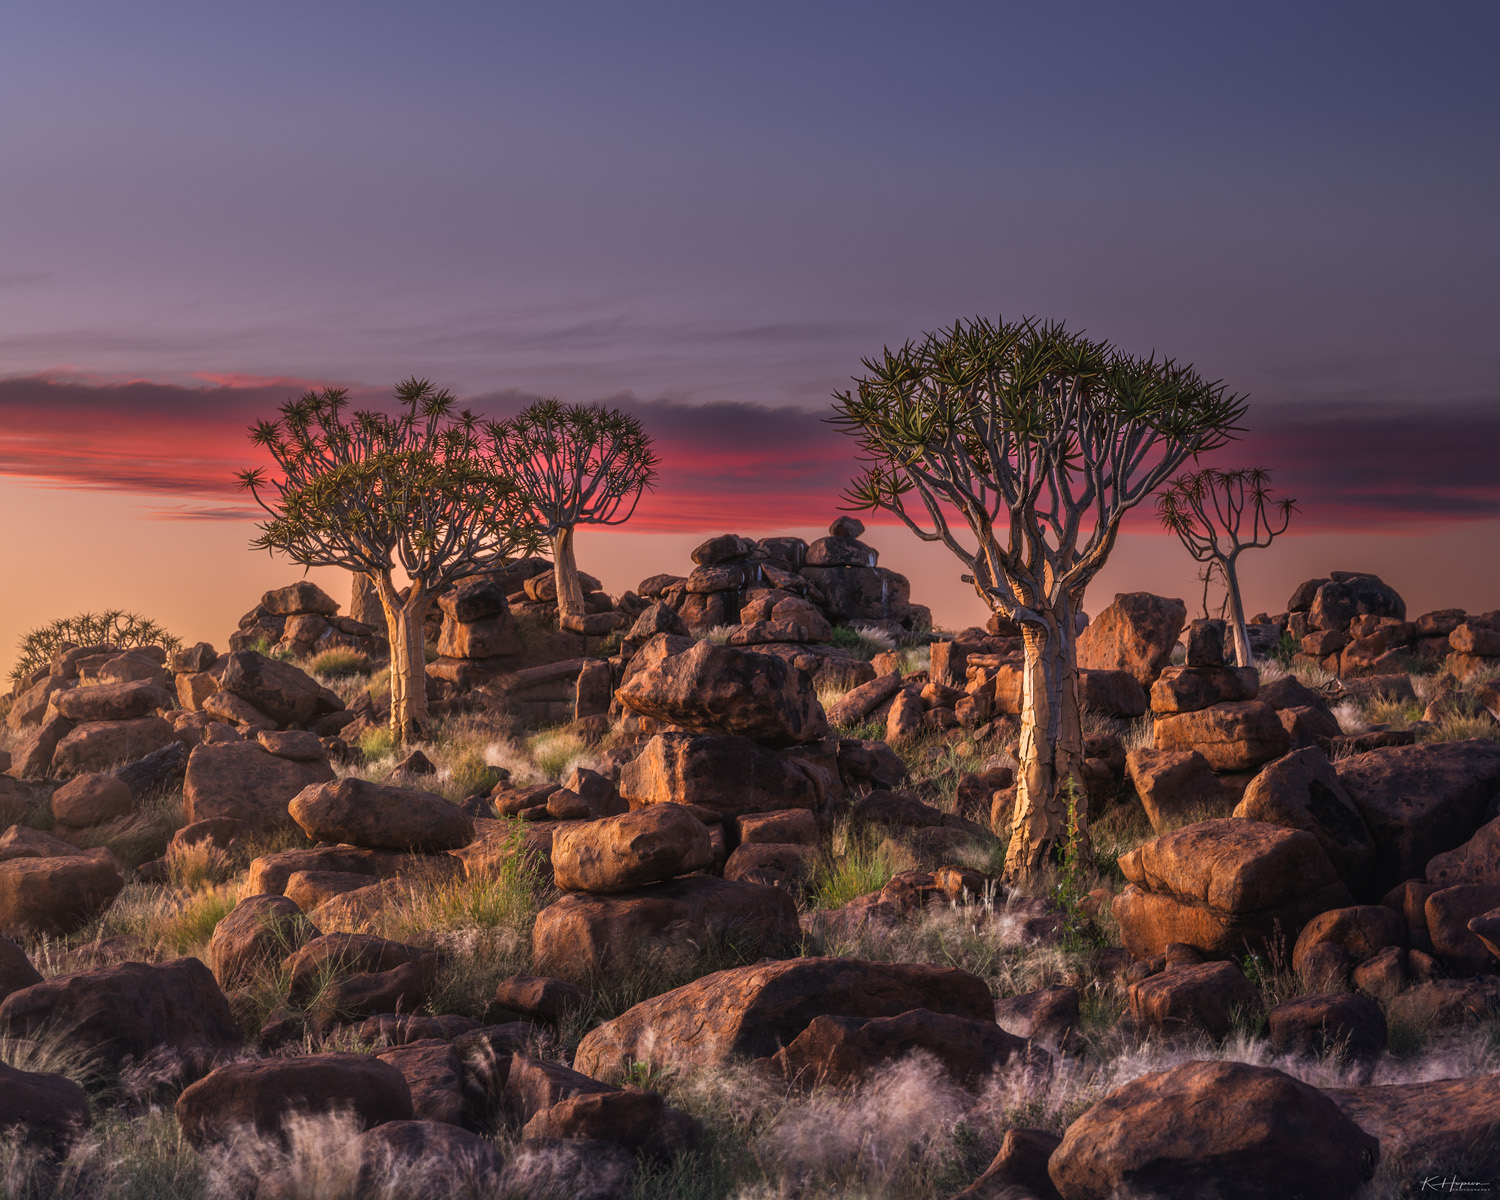 pink and blue sunrise in a quiver tree forest in namibia.